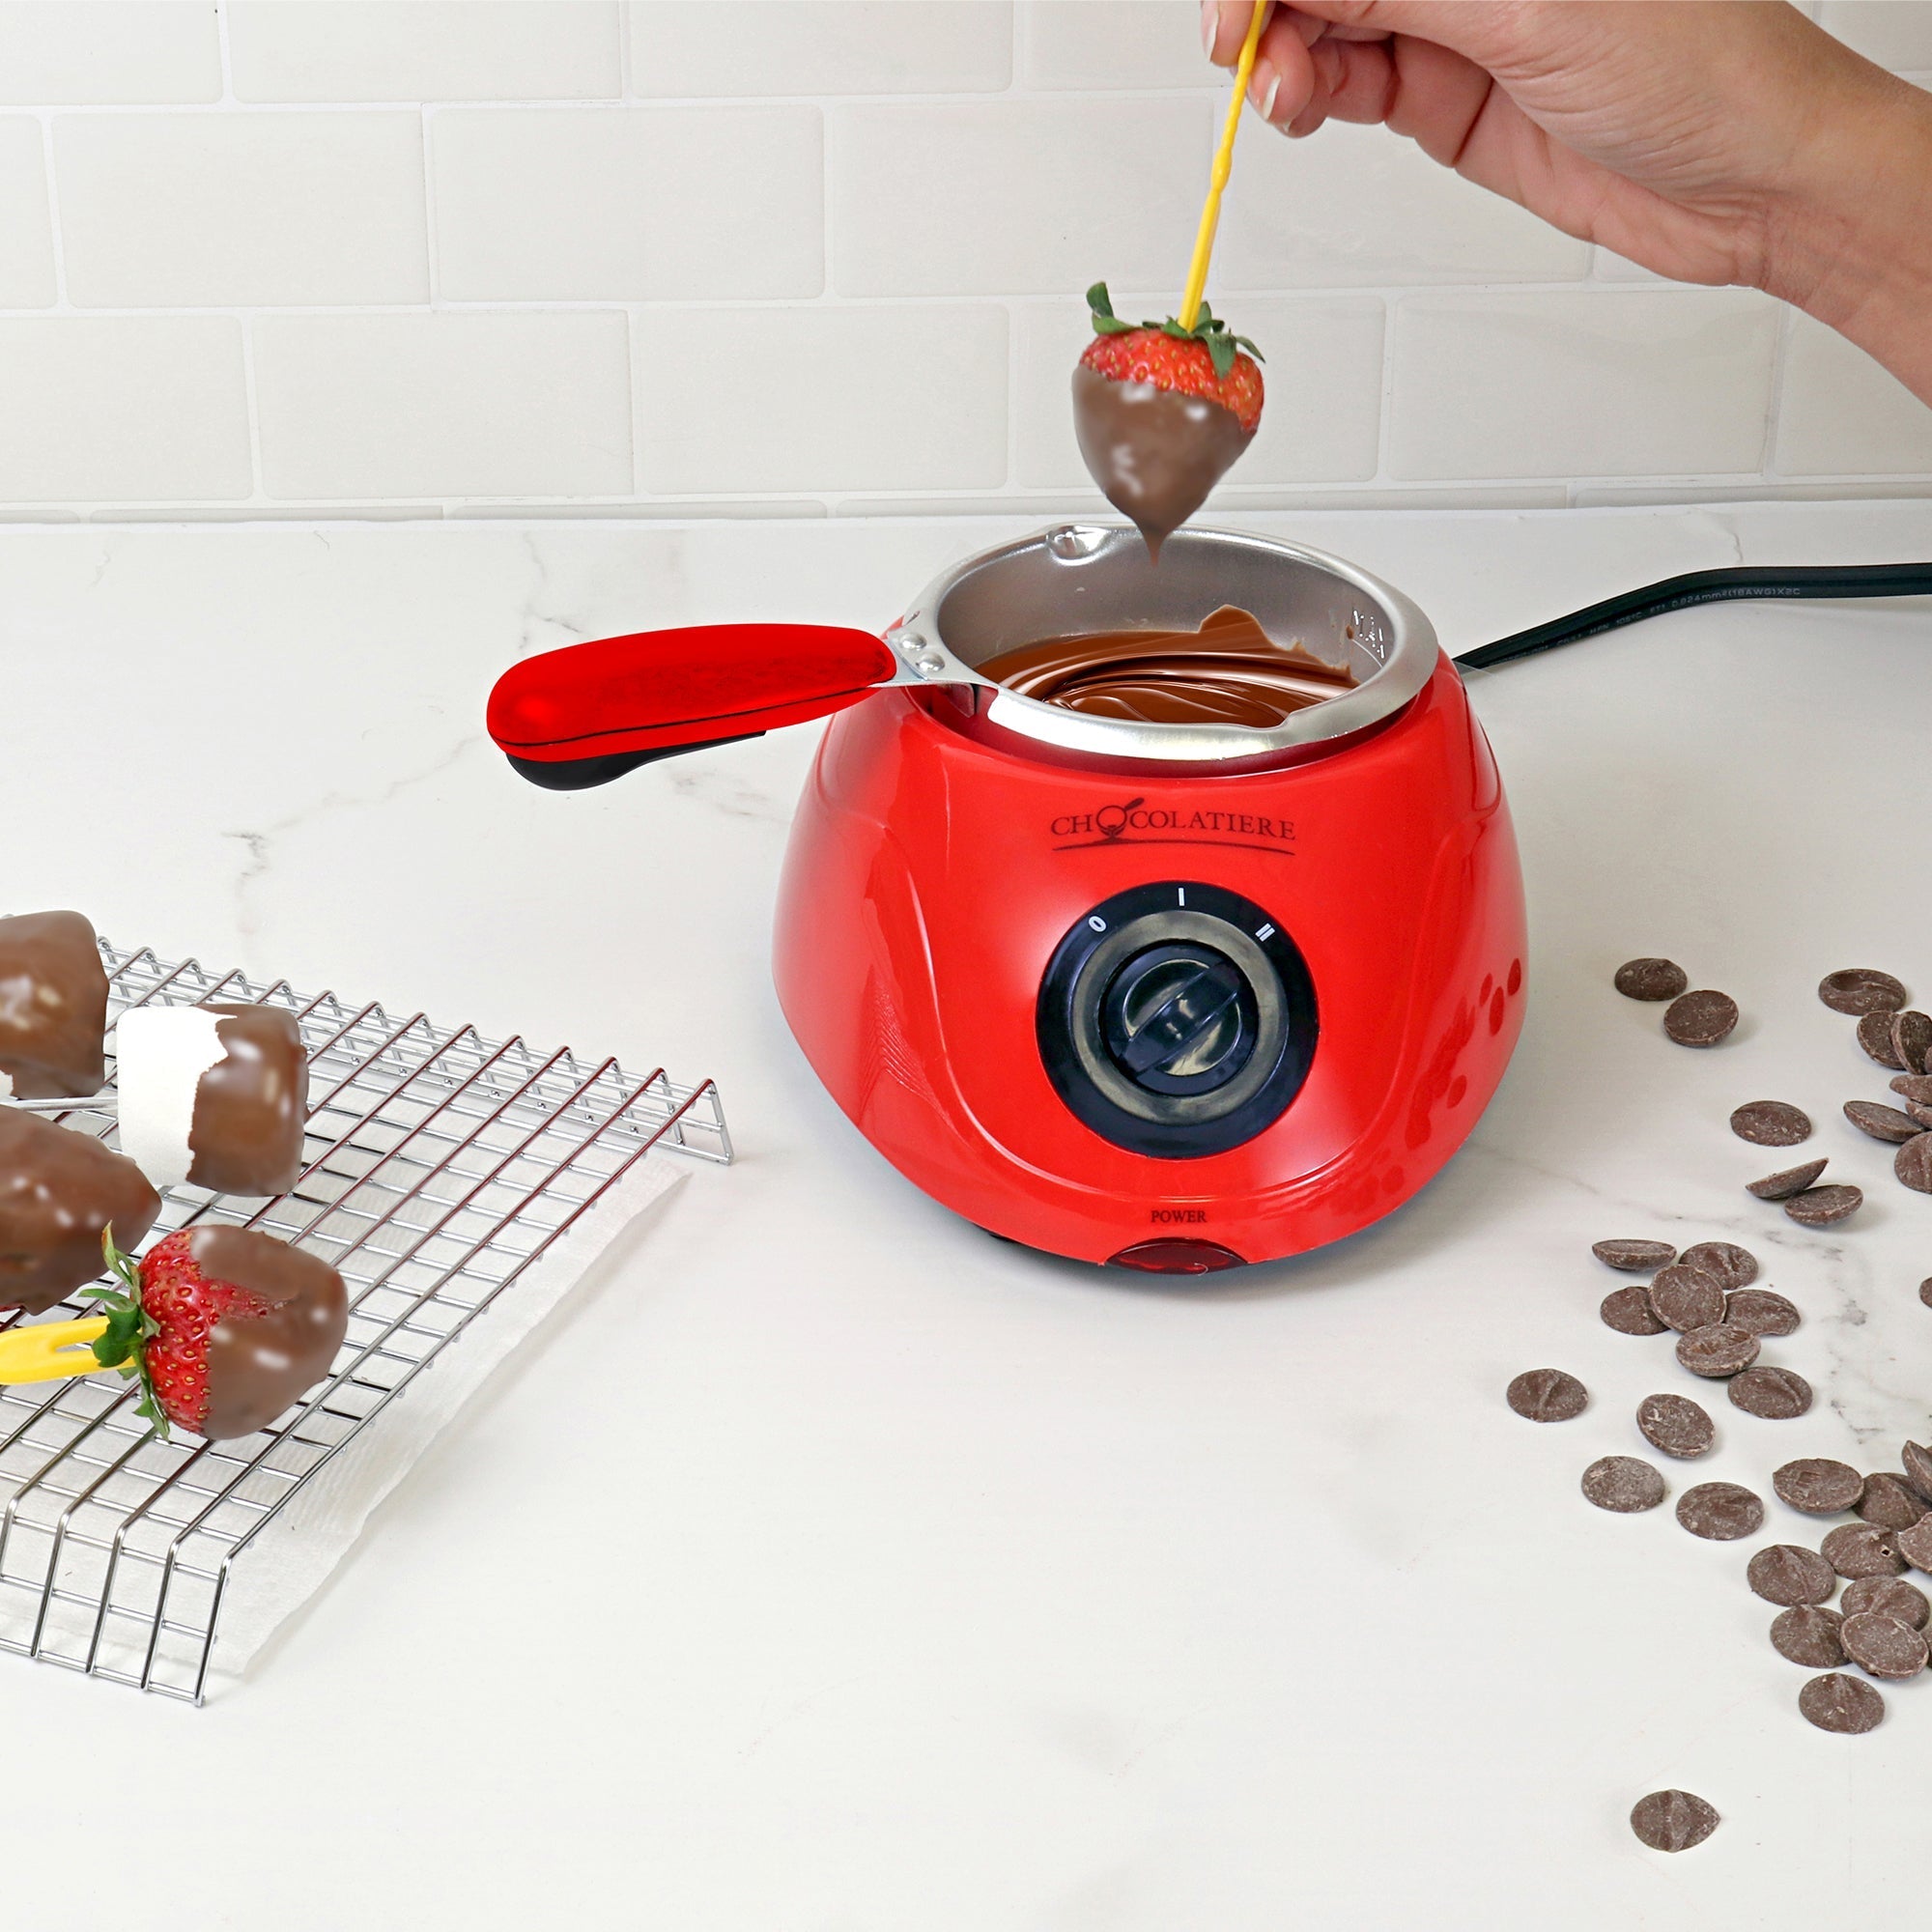 Lifestyle image of a hand dipping a strawberry in melted chocolate in the chocolatiere on a white countertop. There is a cooling rack to the left with dipped strawberries and marshmallows on it and unmelted chocolate discs scattered on the counter to the right.